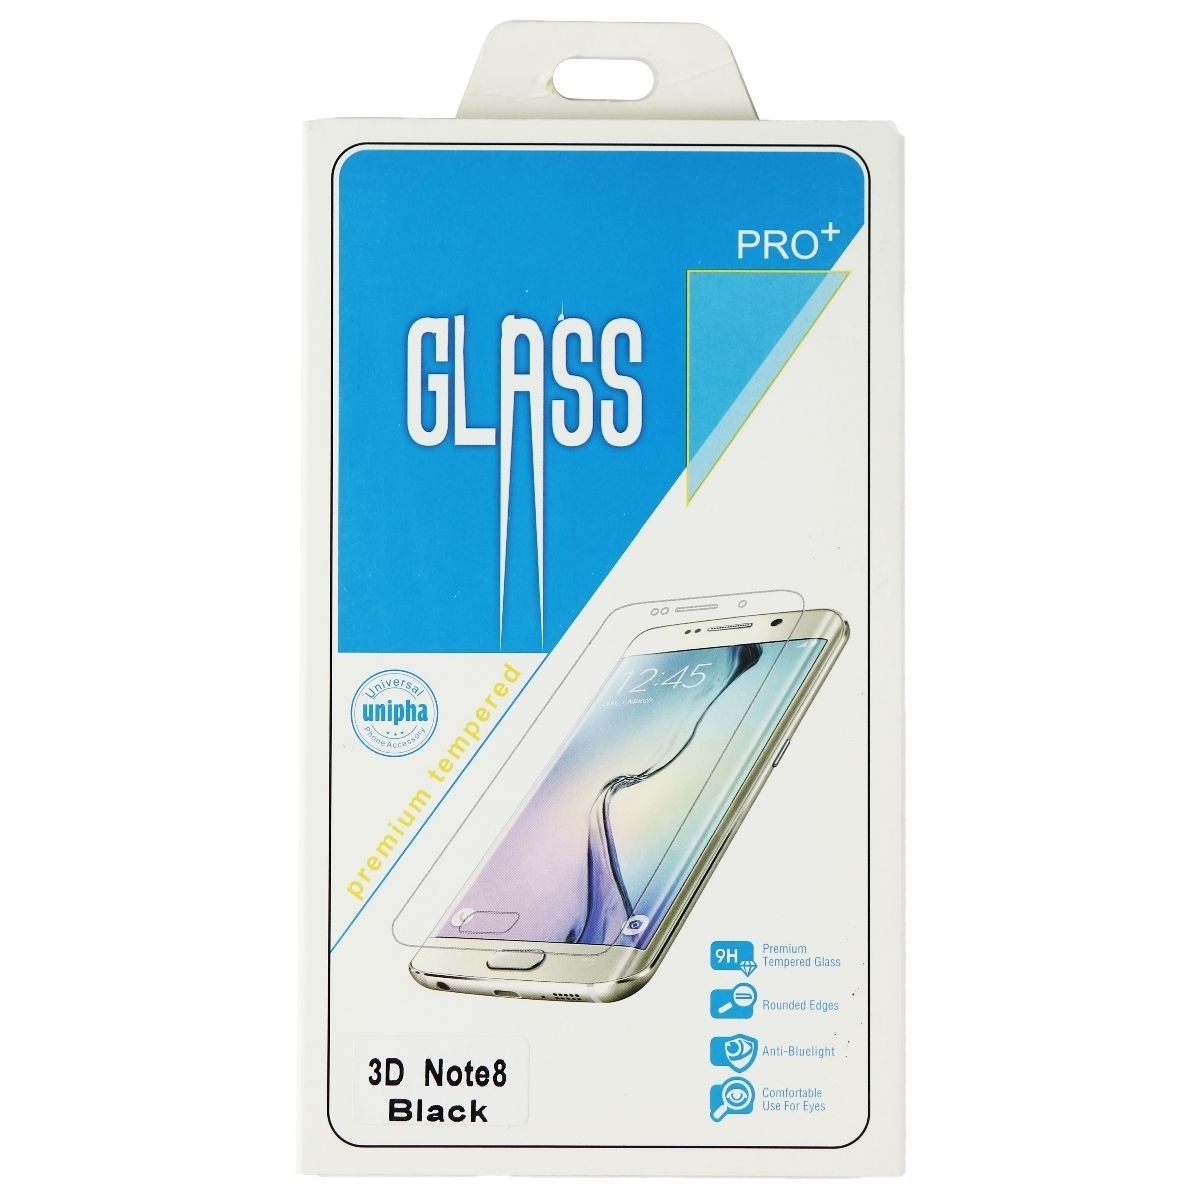 Glass Pro+ Premium Tempered Glass For Samsung Galaxy Note8 - Black/Clear